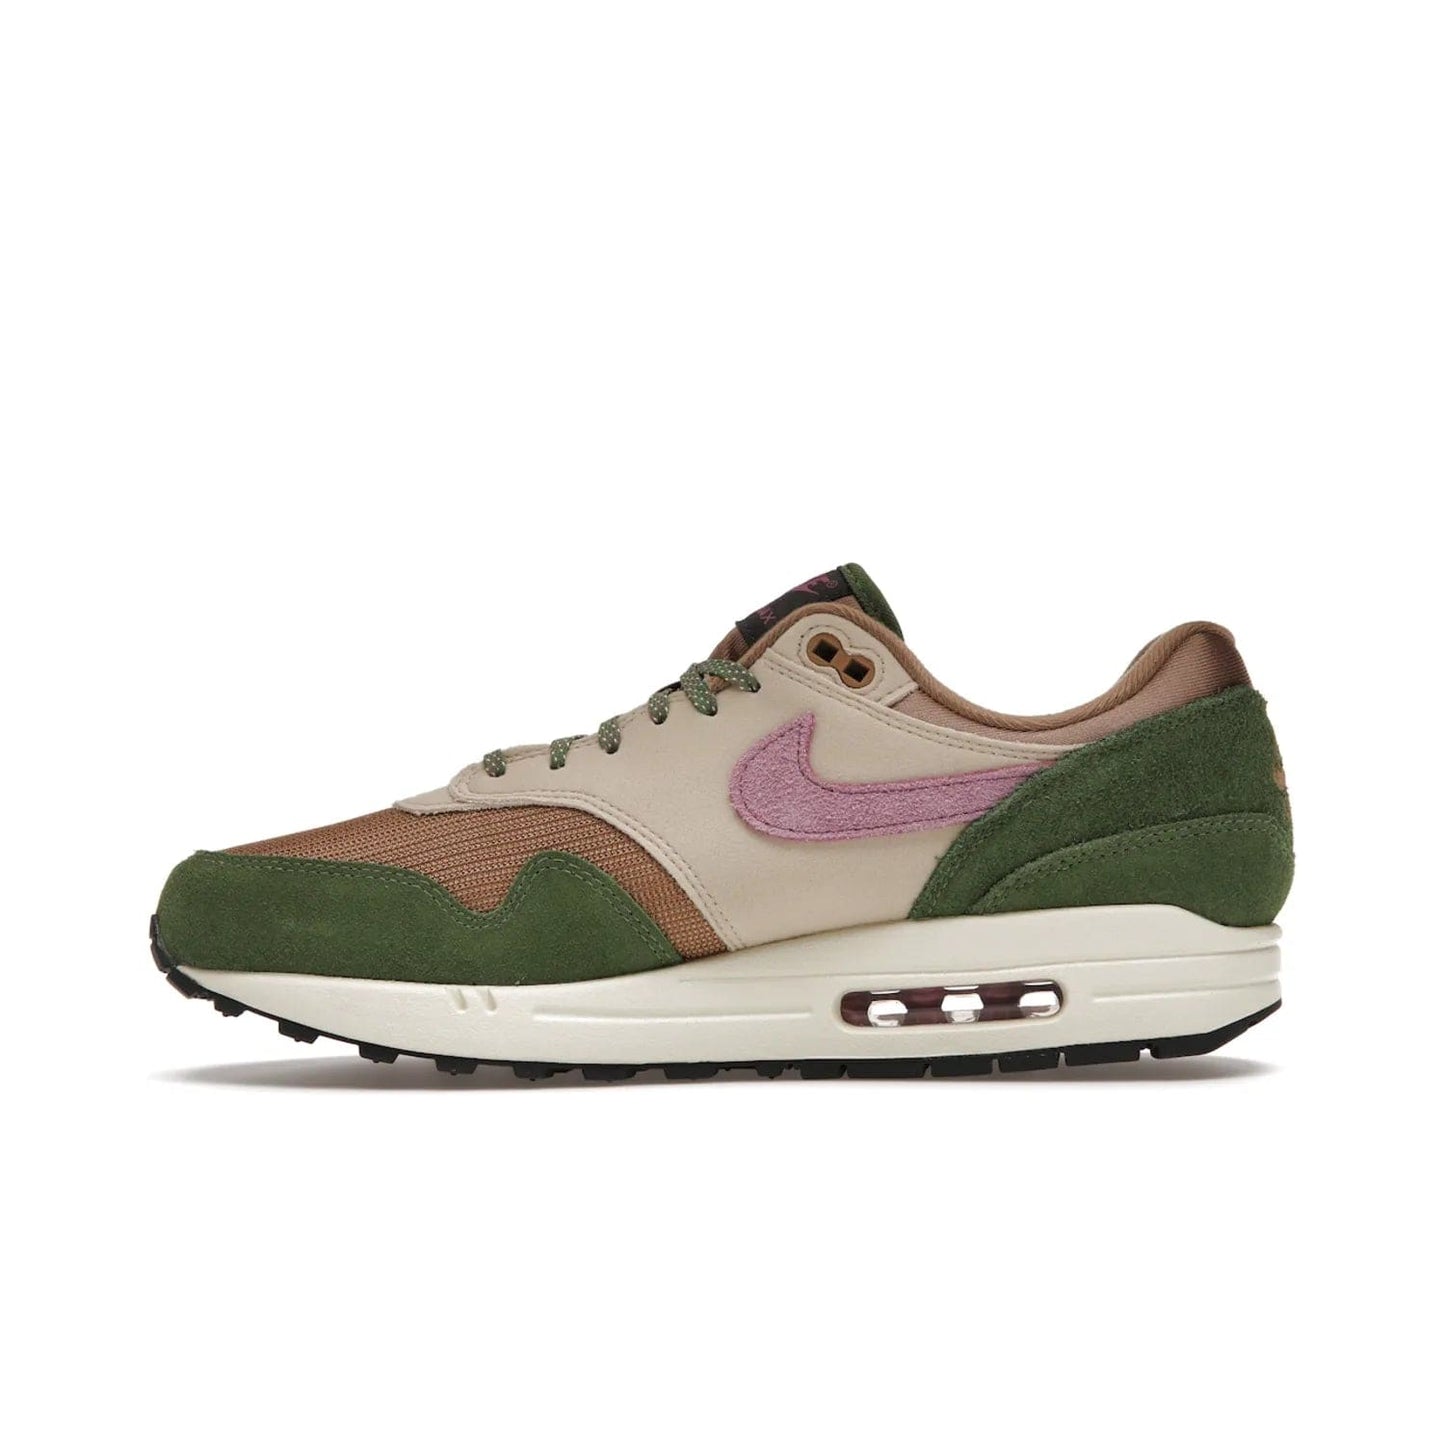 Nike Air Max 1 SH Treeline - Image 19 - Only at www.BallersClubKickz.com - A classic Nike Air Max 1 SH Treeline with a brown mesh upper, taupe Durabuck overlays, and hairy green suede details. Light Bordeaux Swoosh and woven tongue label for a pop of color. Released in May 2022. Perfect for any outfit and sure to impress.